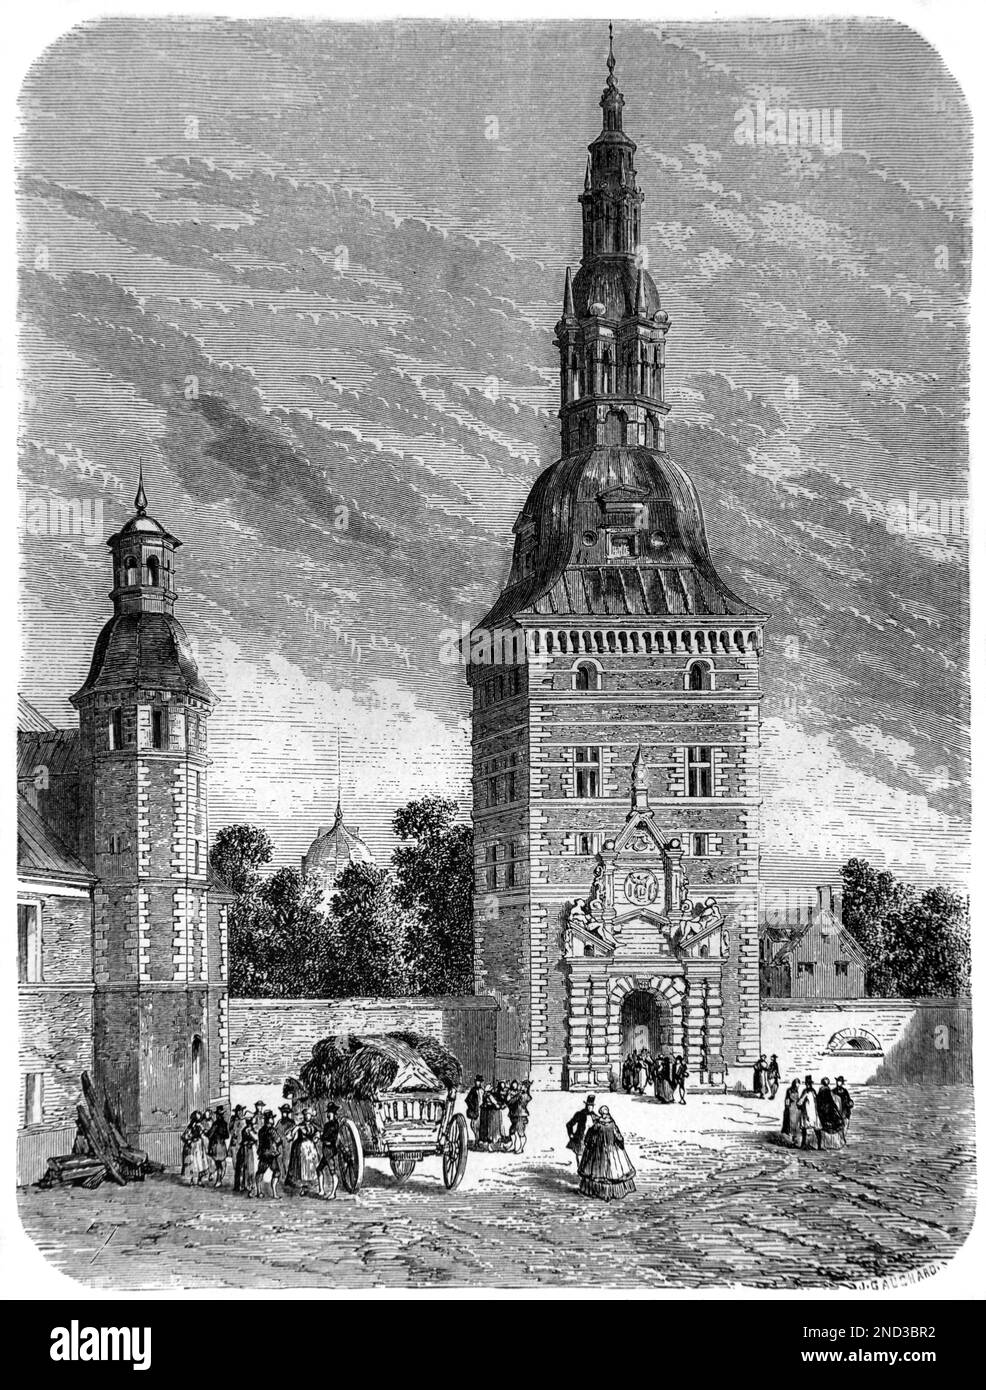 Entrance Tower of Frederiksborg Castle (c17th) Royal Residence, Renaissance Castle or Chateau and now the Danish Museum of National History, Hillerod Denmark. Vintage Engraving or Illustration 1862 Stock Photo